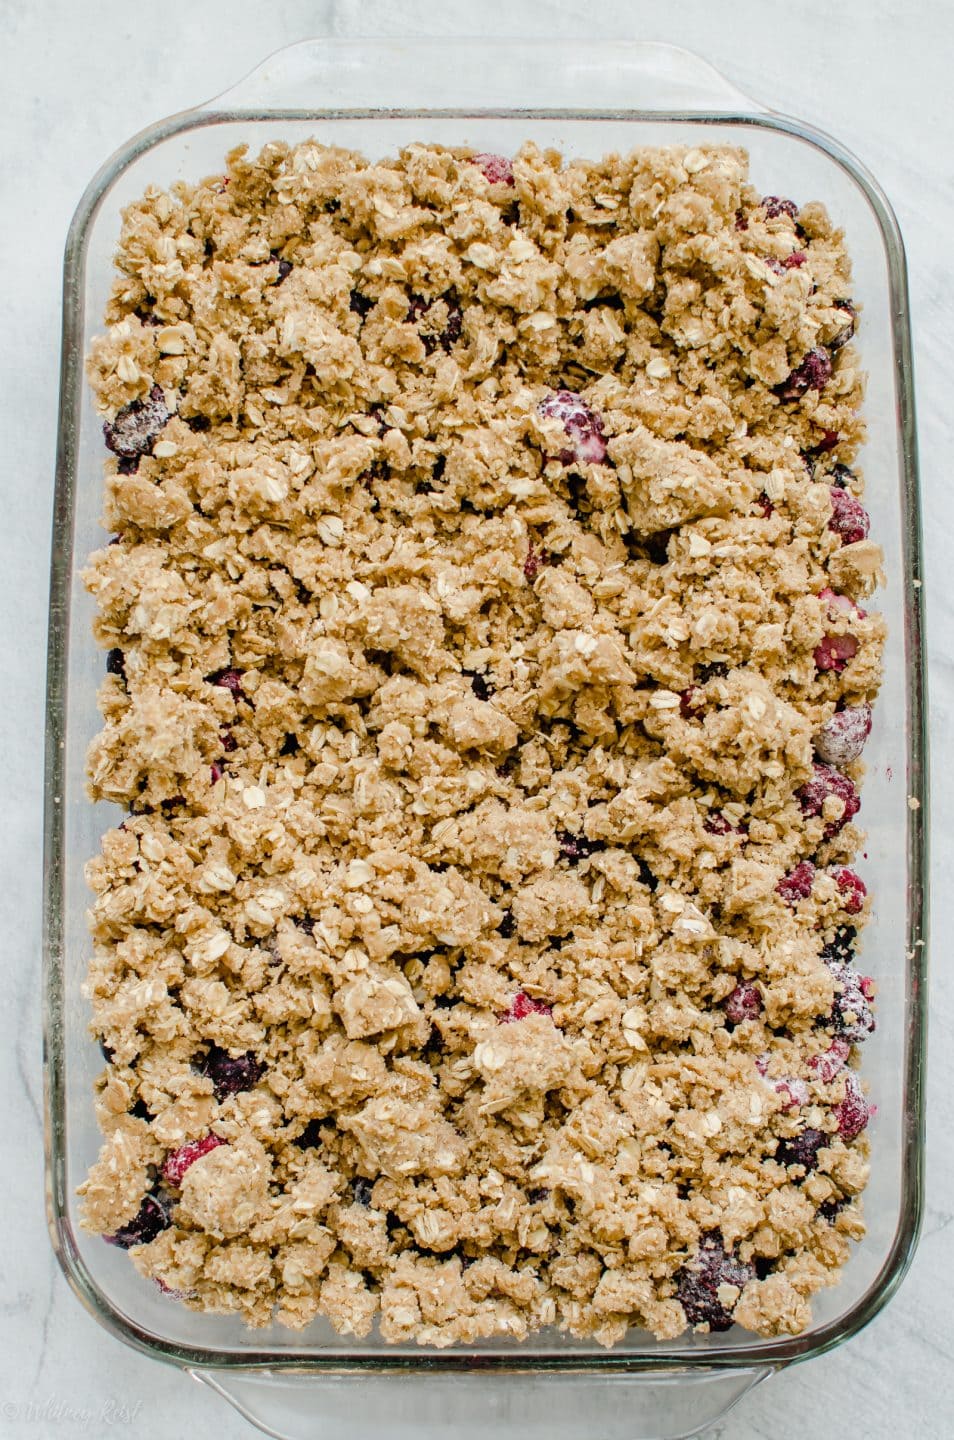 An unbaked mixed berry crumble in a glass baking dish.